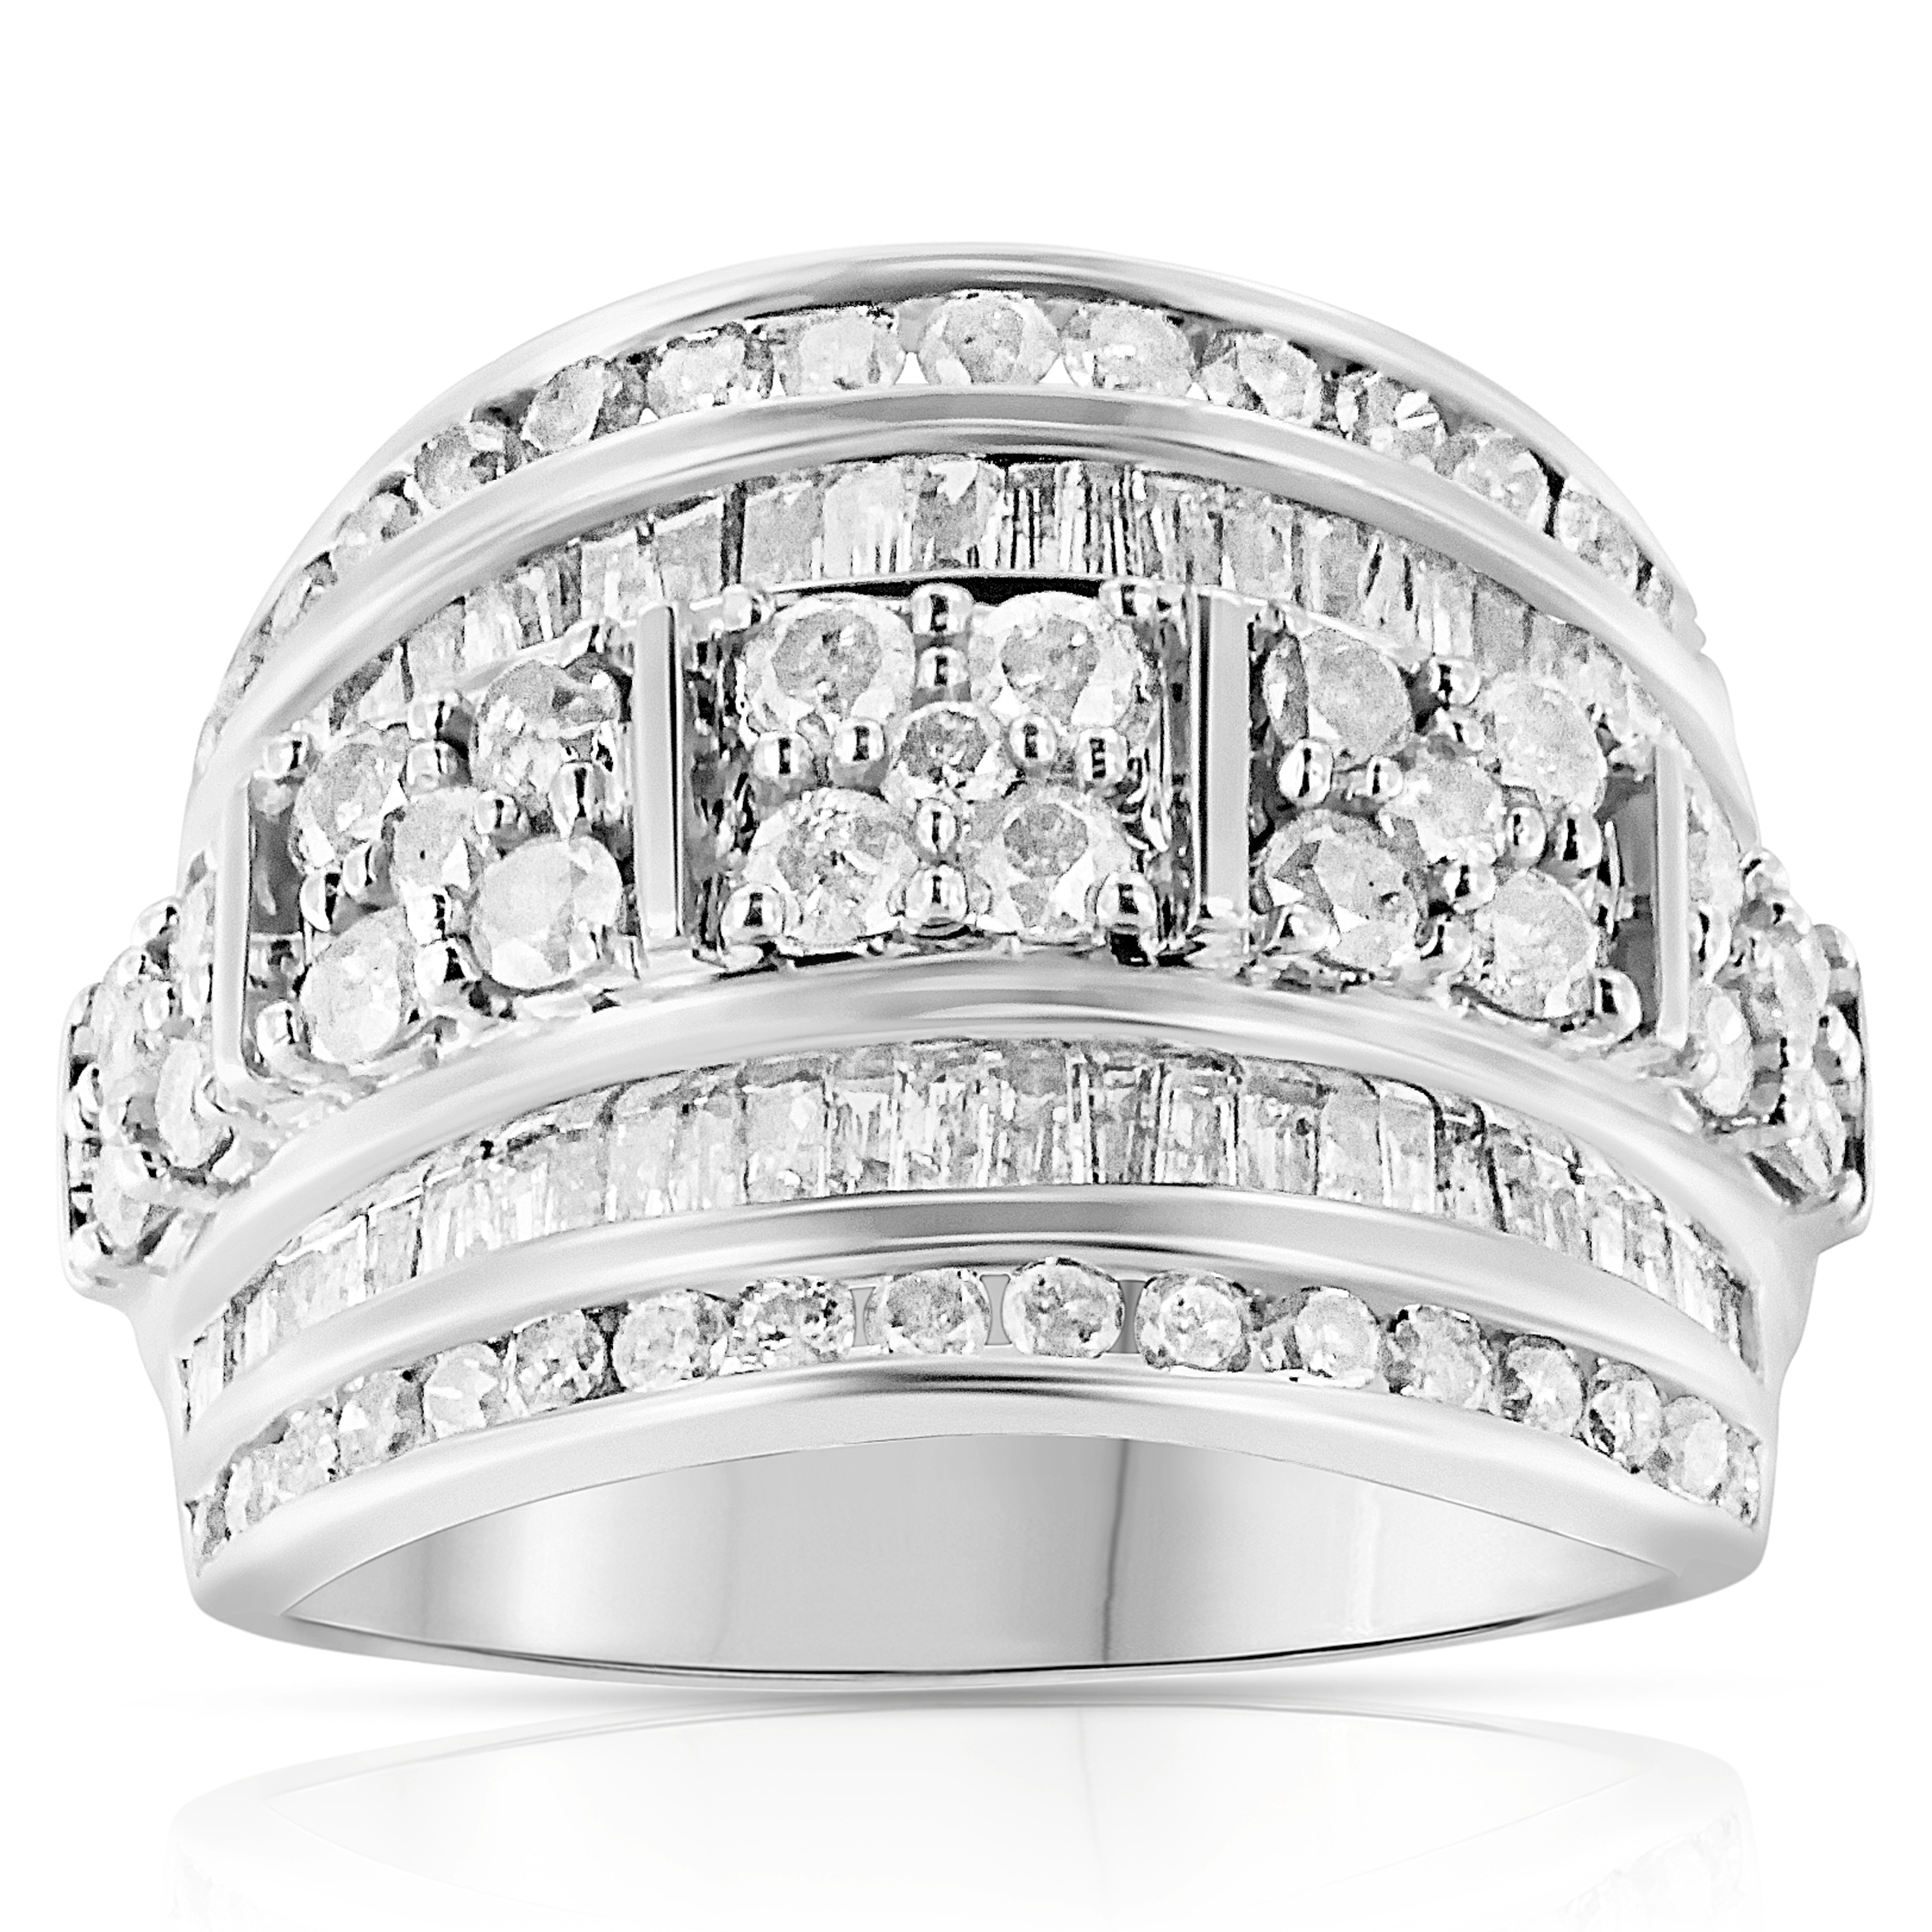 1/2 cttw, H-I Color, I2 Clarity Three-Row Sterling Silver Diamond Cocktail Ring